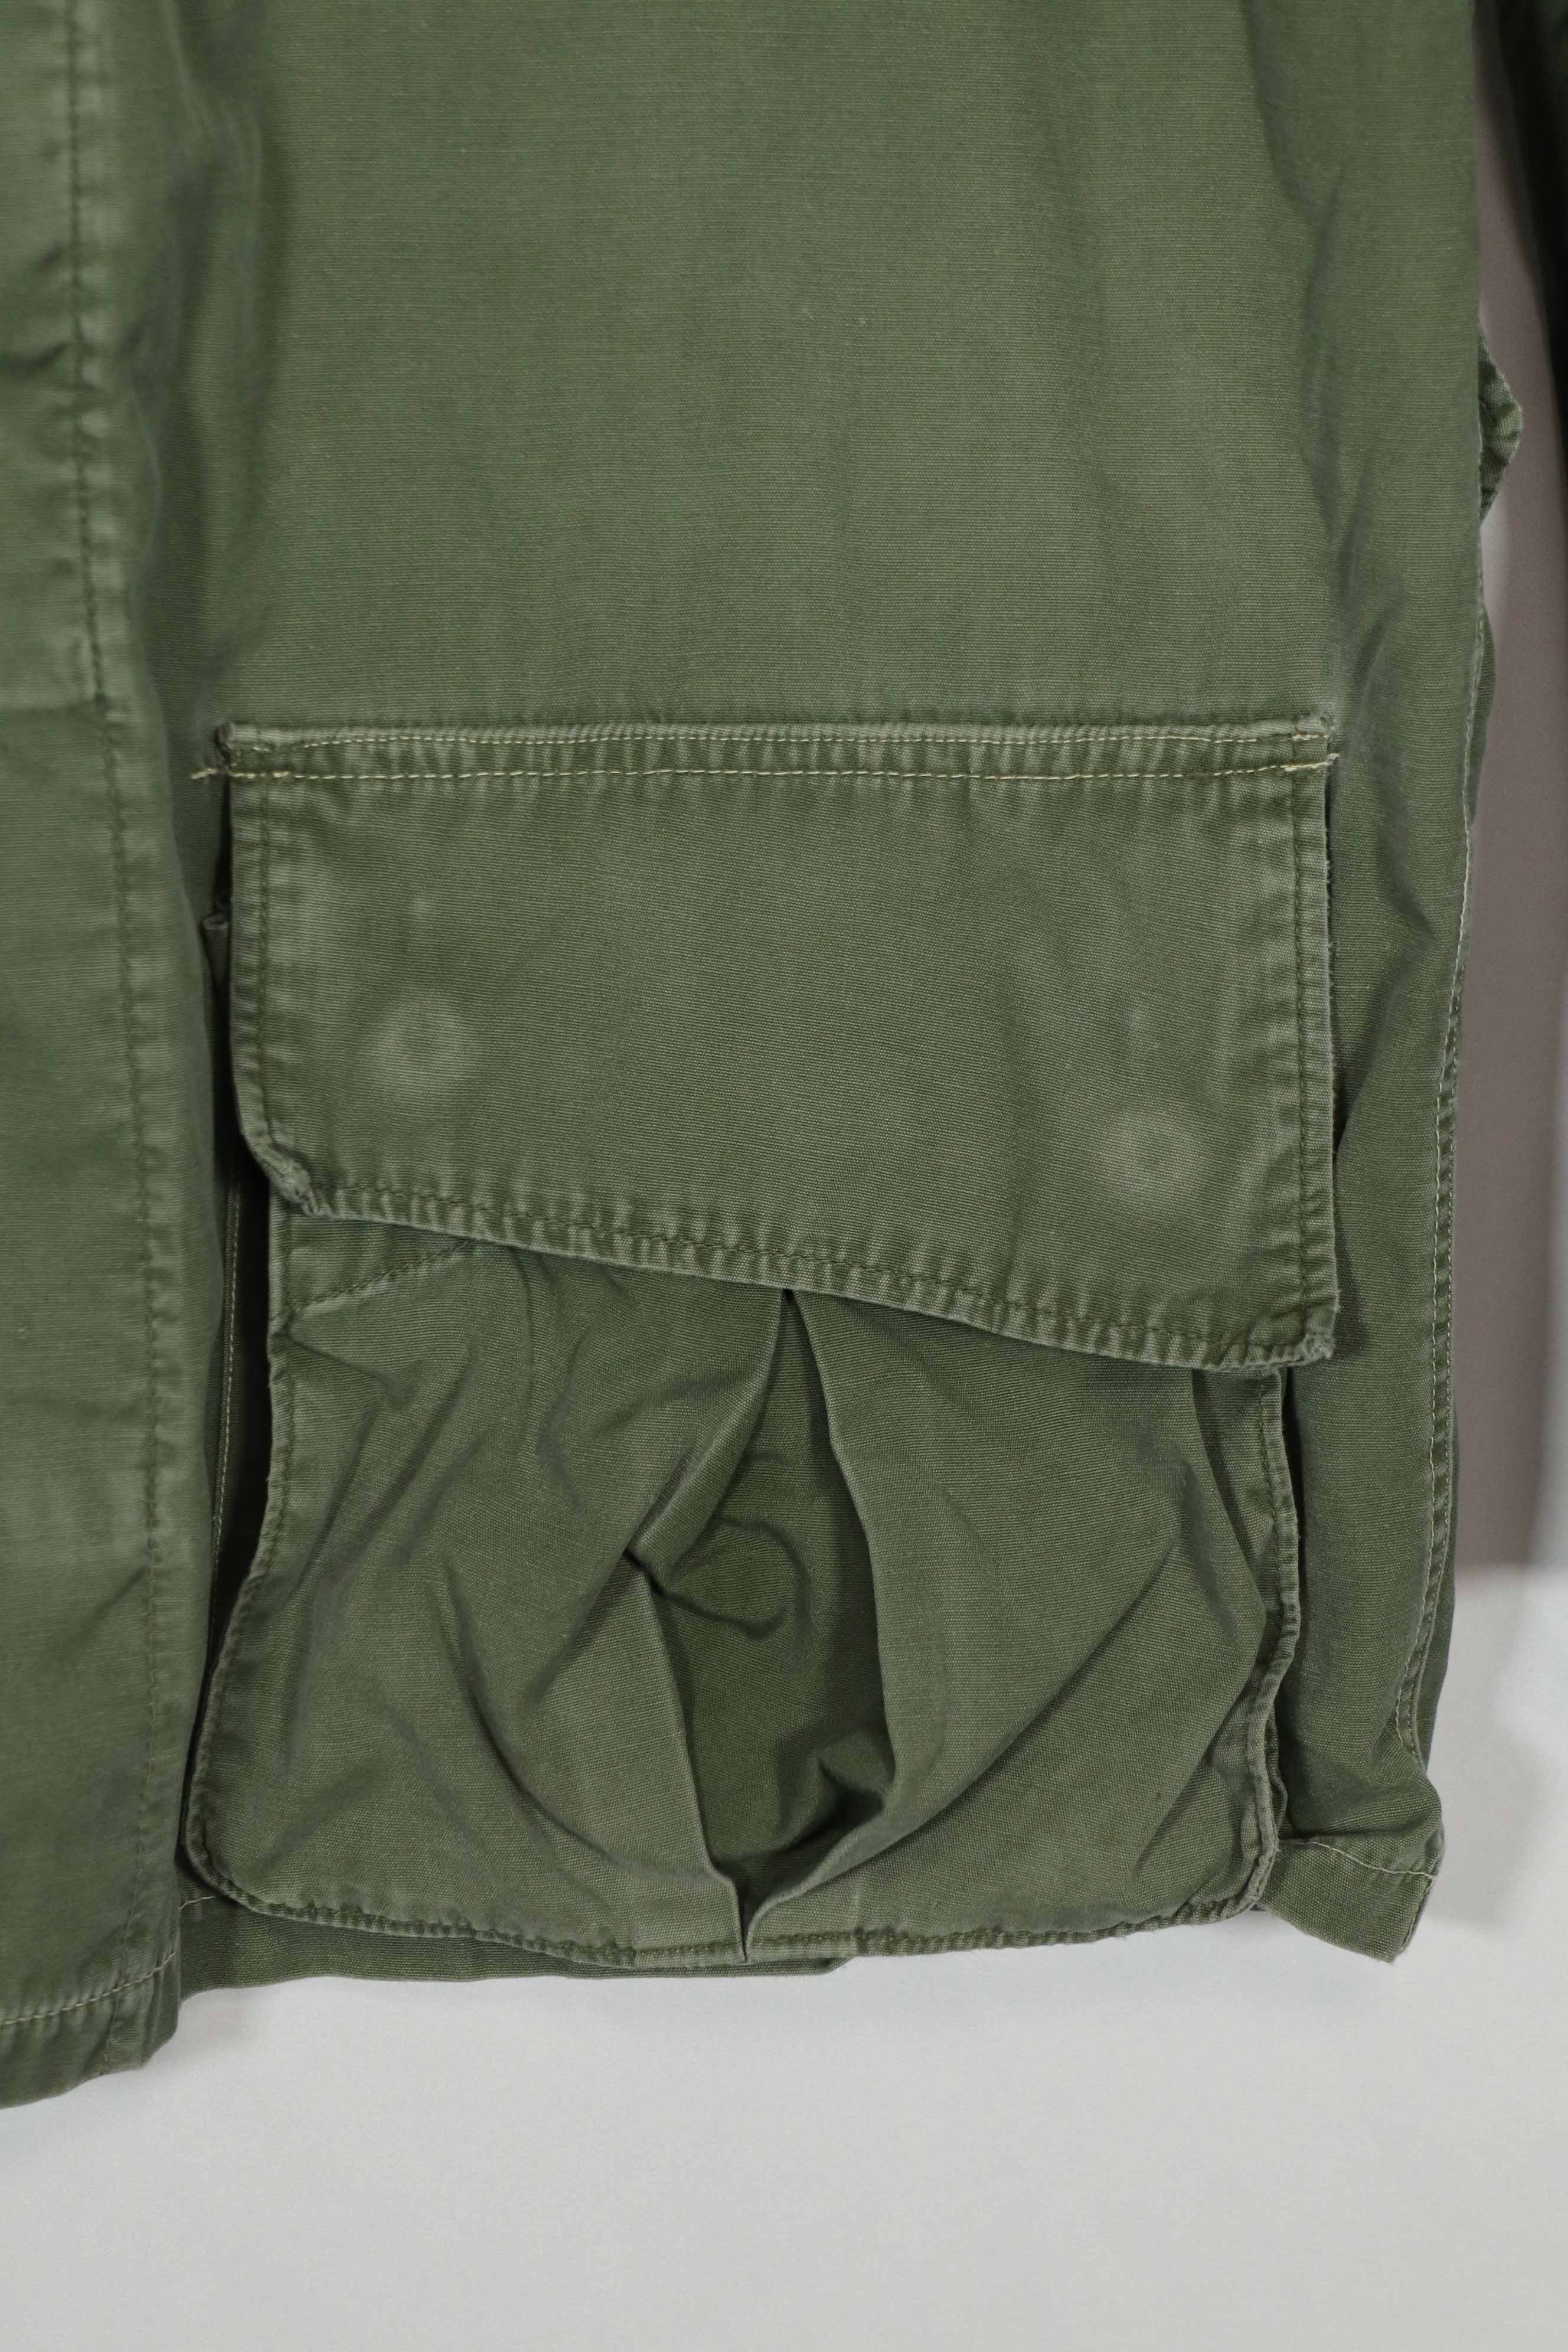 Real 2nd Model Jungle Fatigue Jacket, stains, patch marks, L-R size, used, A